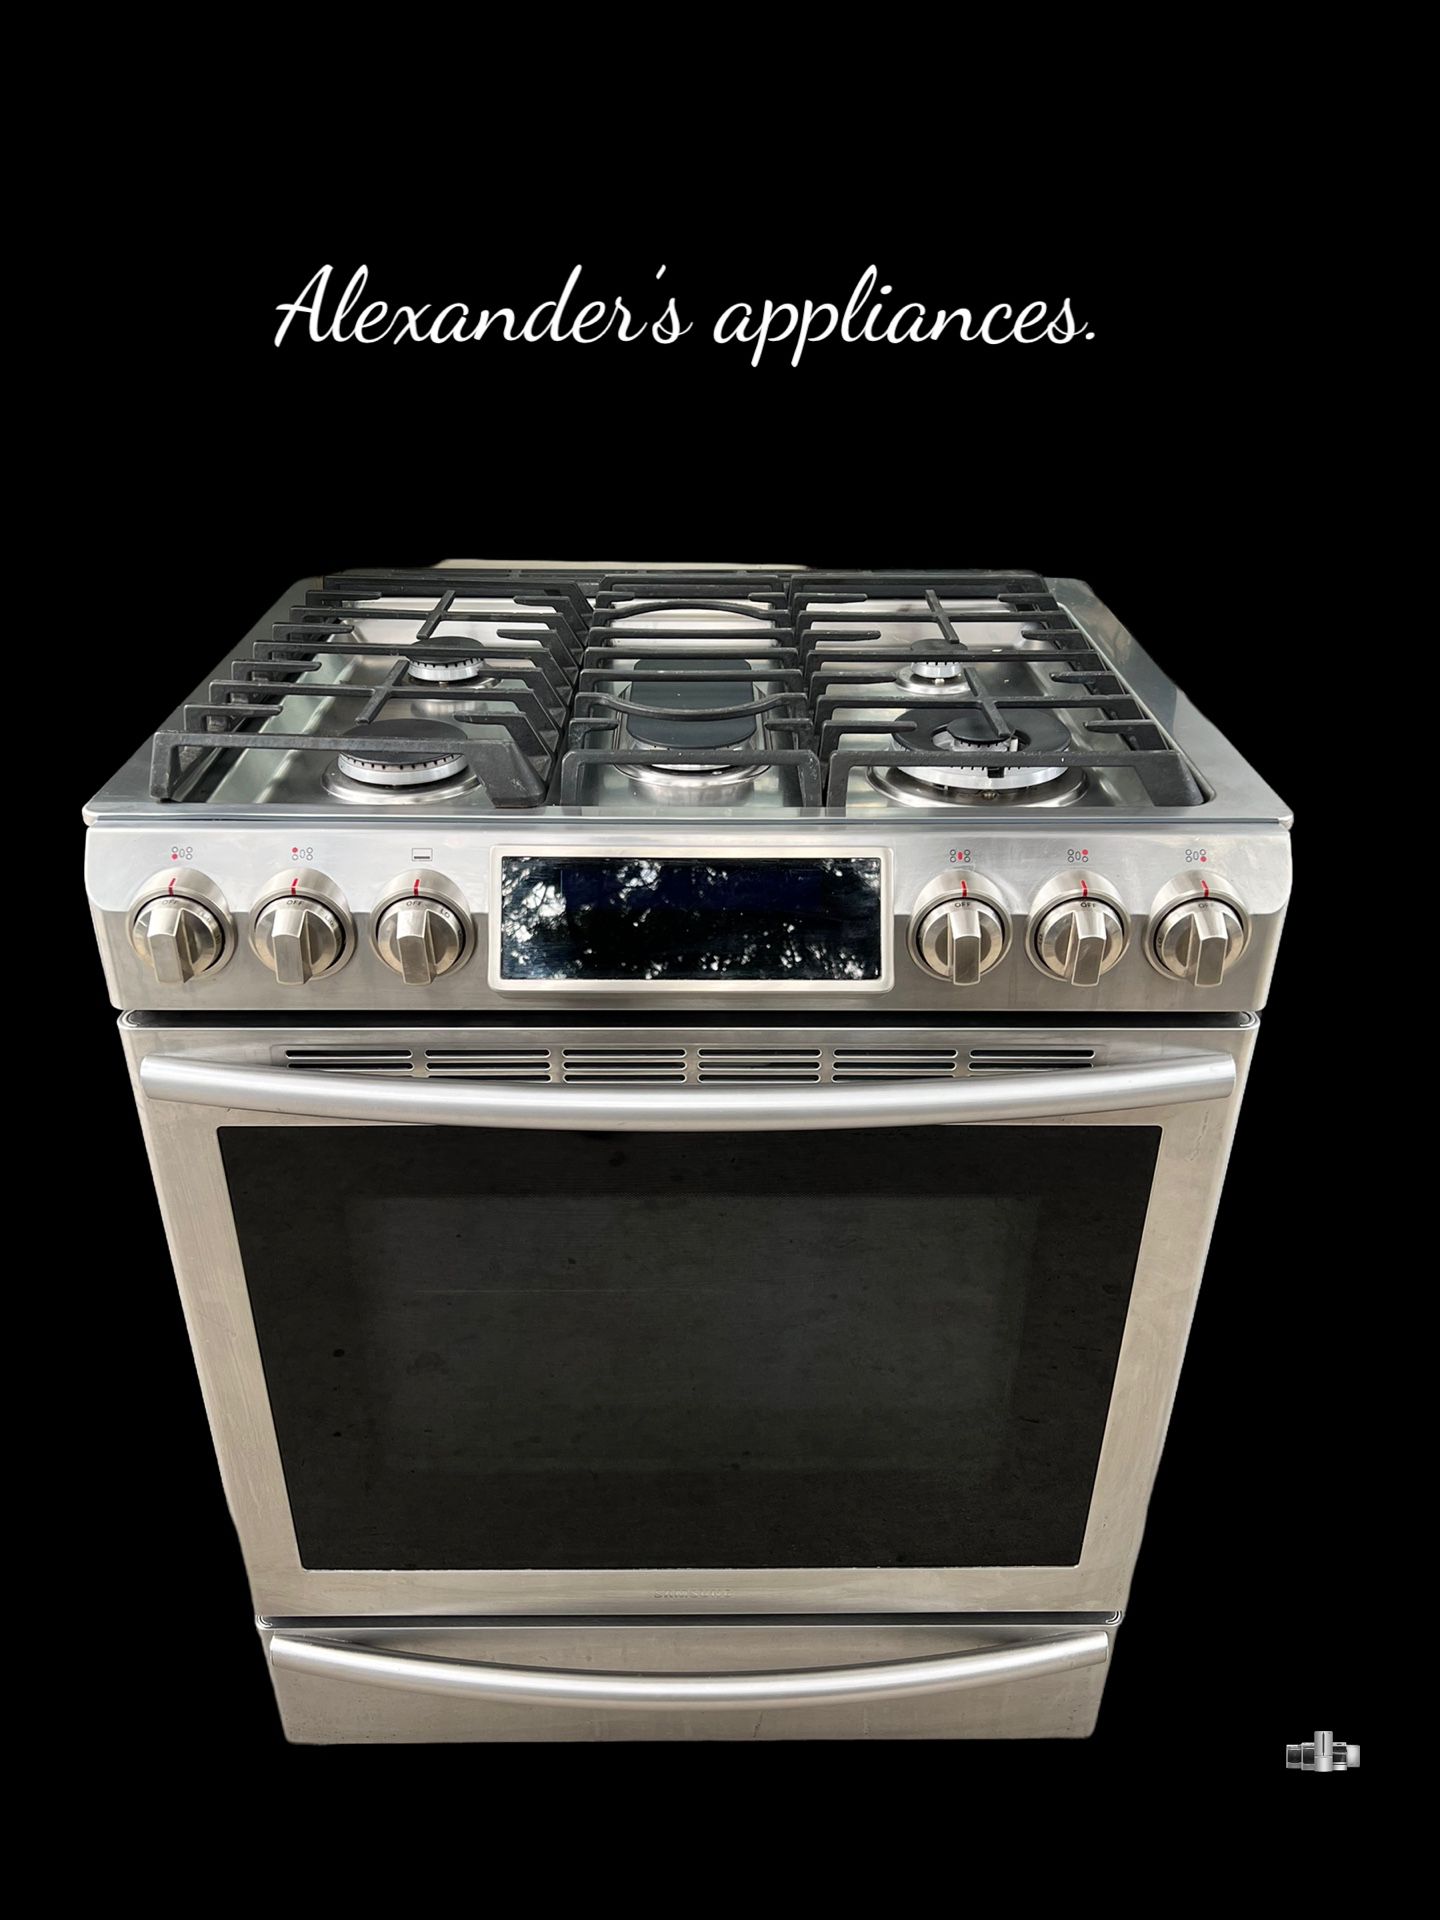 Samsung 30 in. 5.8 cu. ft. Slide-In Gas Range with Self-Cleaning Convection Oven in Stainless Steel.